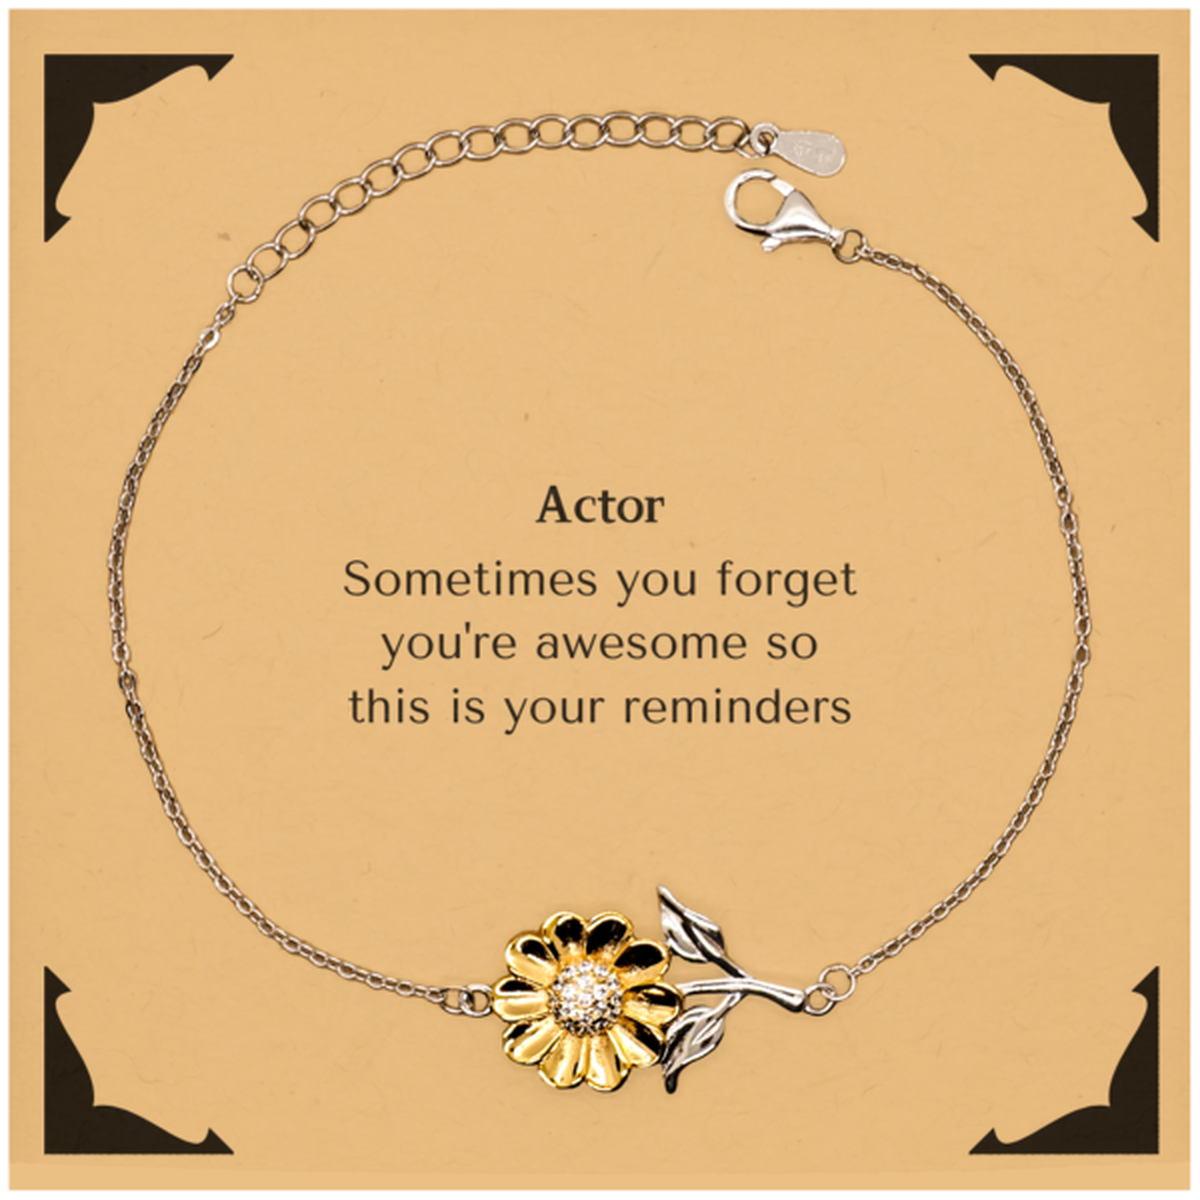 Sentimental Actor Sunflower Bracelet, Actor Sometimes you forget you're awesome so this is your reminders, Graduation Christmas Birthday Gifts for Actor, Men, Women, Coworkers